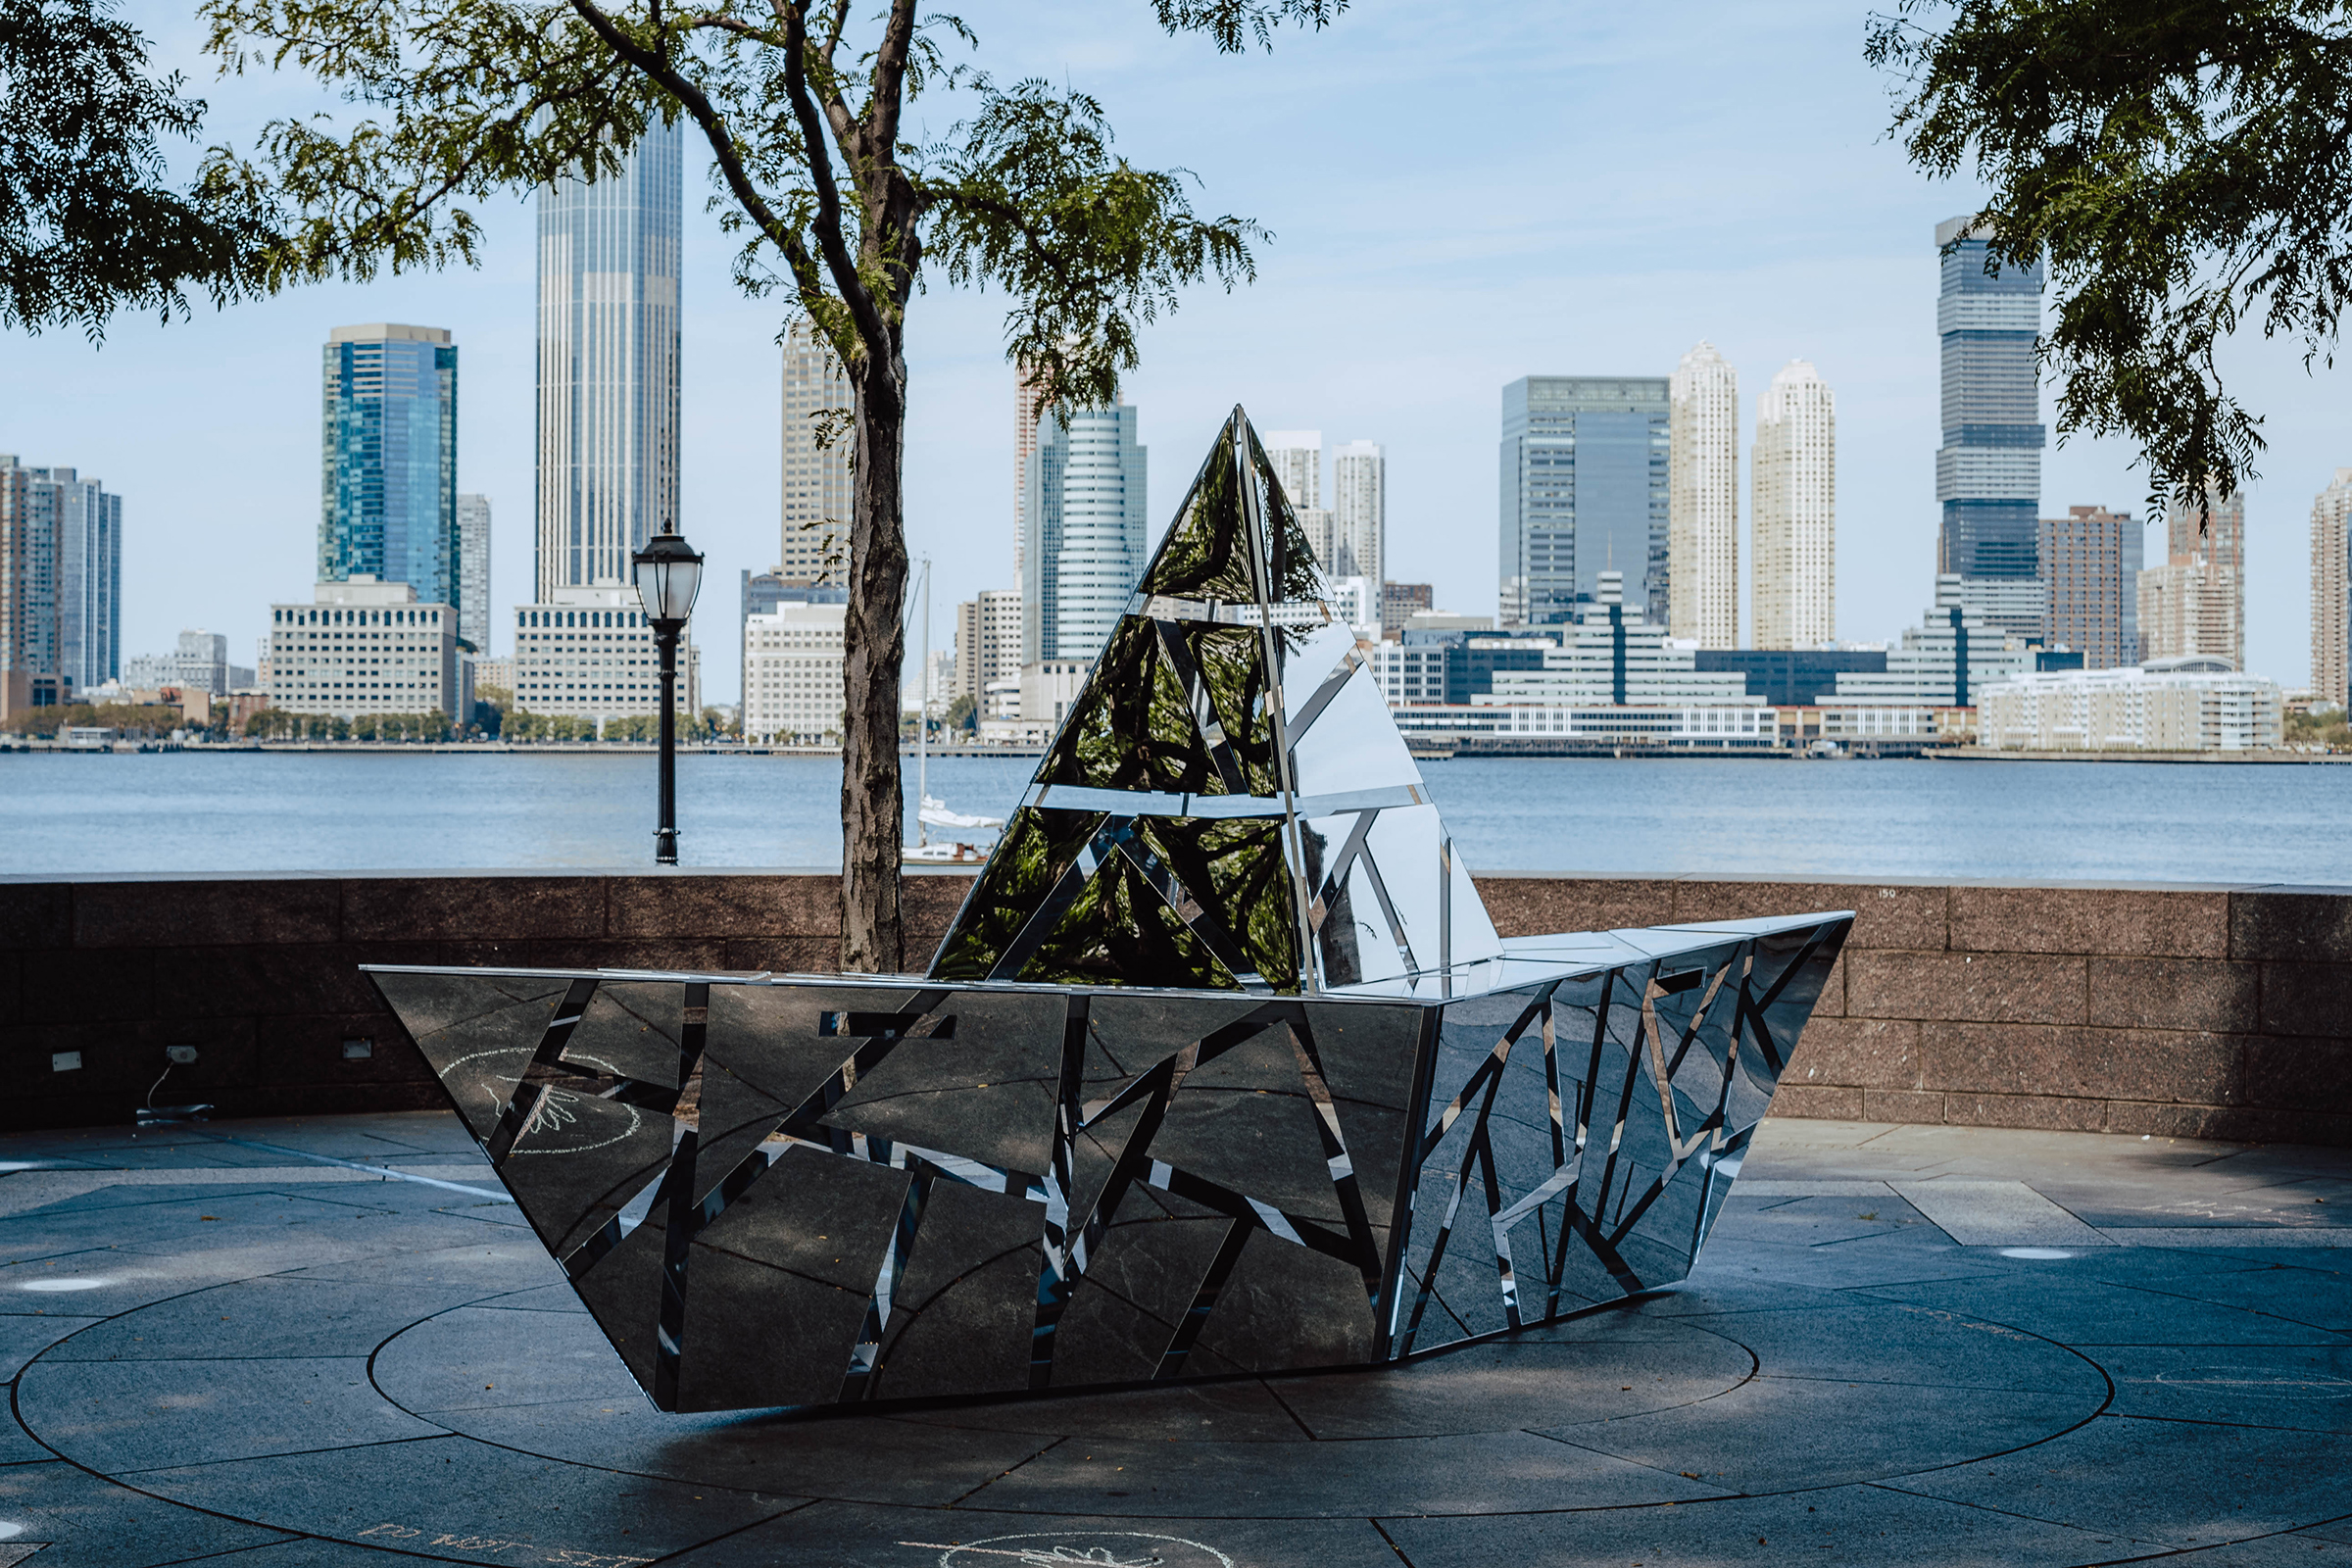 This photograph shows a large metal sculpture resembling an origami boat. The boat is constructed from geometric mirrored panels. There are three-inch spaces between the mirrored panels, so that the geometric shapes appear to float. The sculpture sits on a concrete plaza. Behind it is a low wall, a tree, and a river, with an urban skyline on the far side of the river. The sky is light blue with wispy clouds.